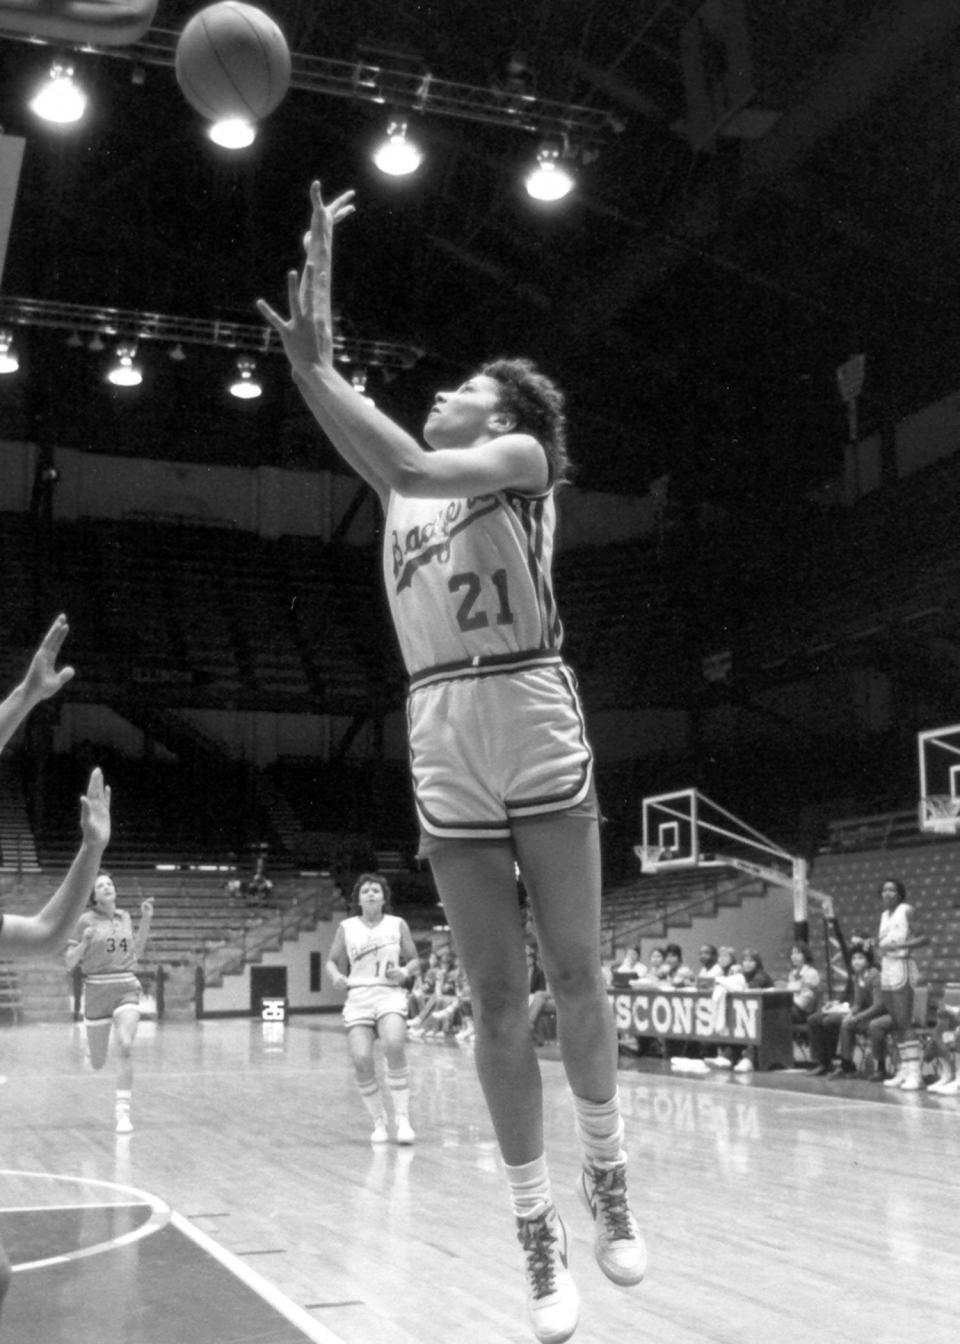 Theresa Huff takes a shot during her 1979-80 season at Wisconsin, her freshman year.